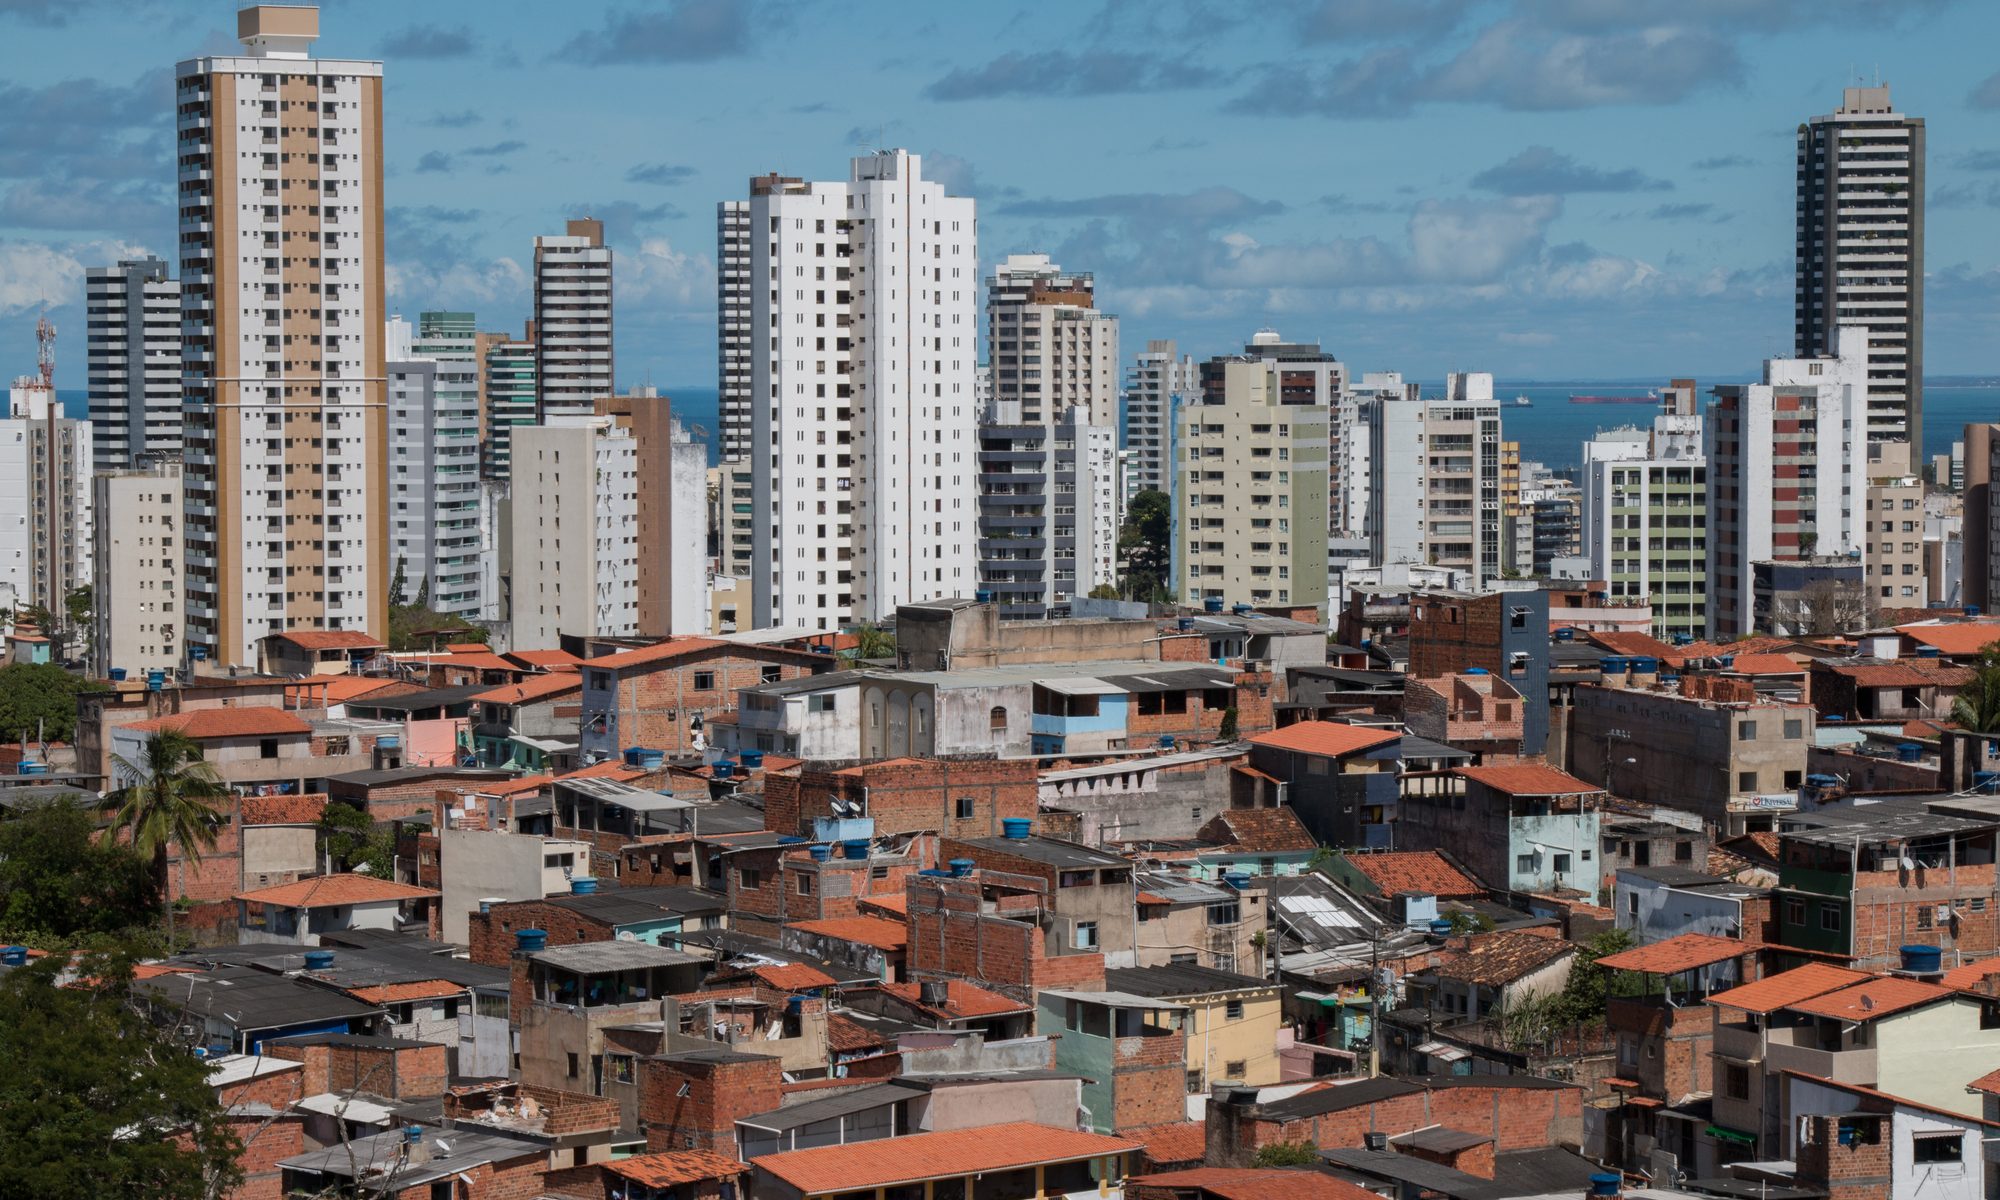 photograph of skyscrapers behind a favela